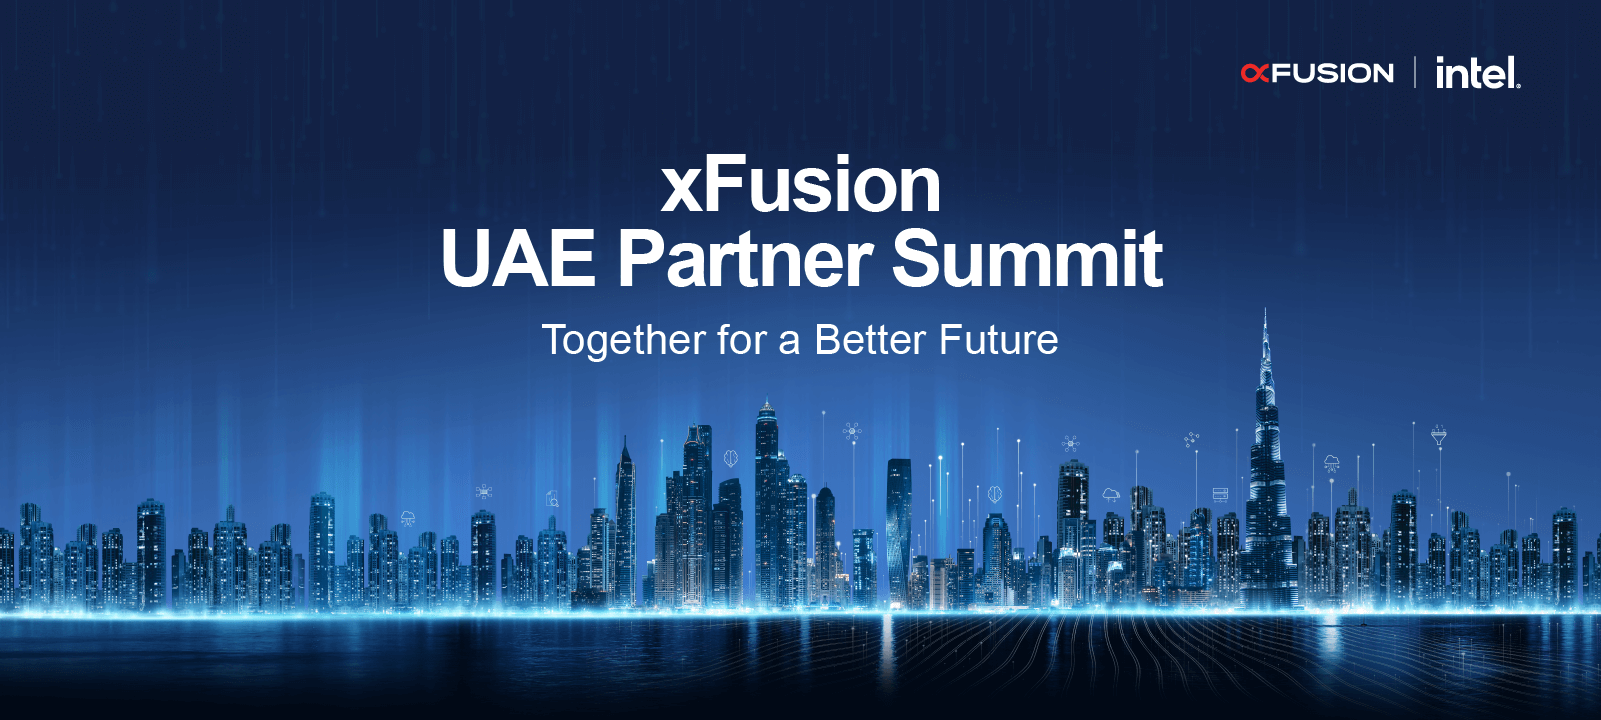 xFusion UAE Partner Summit - Together for a Better Future